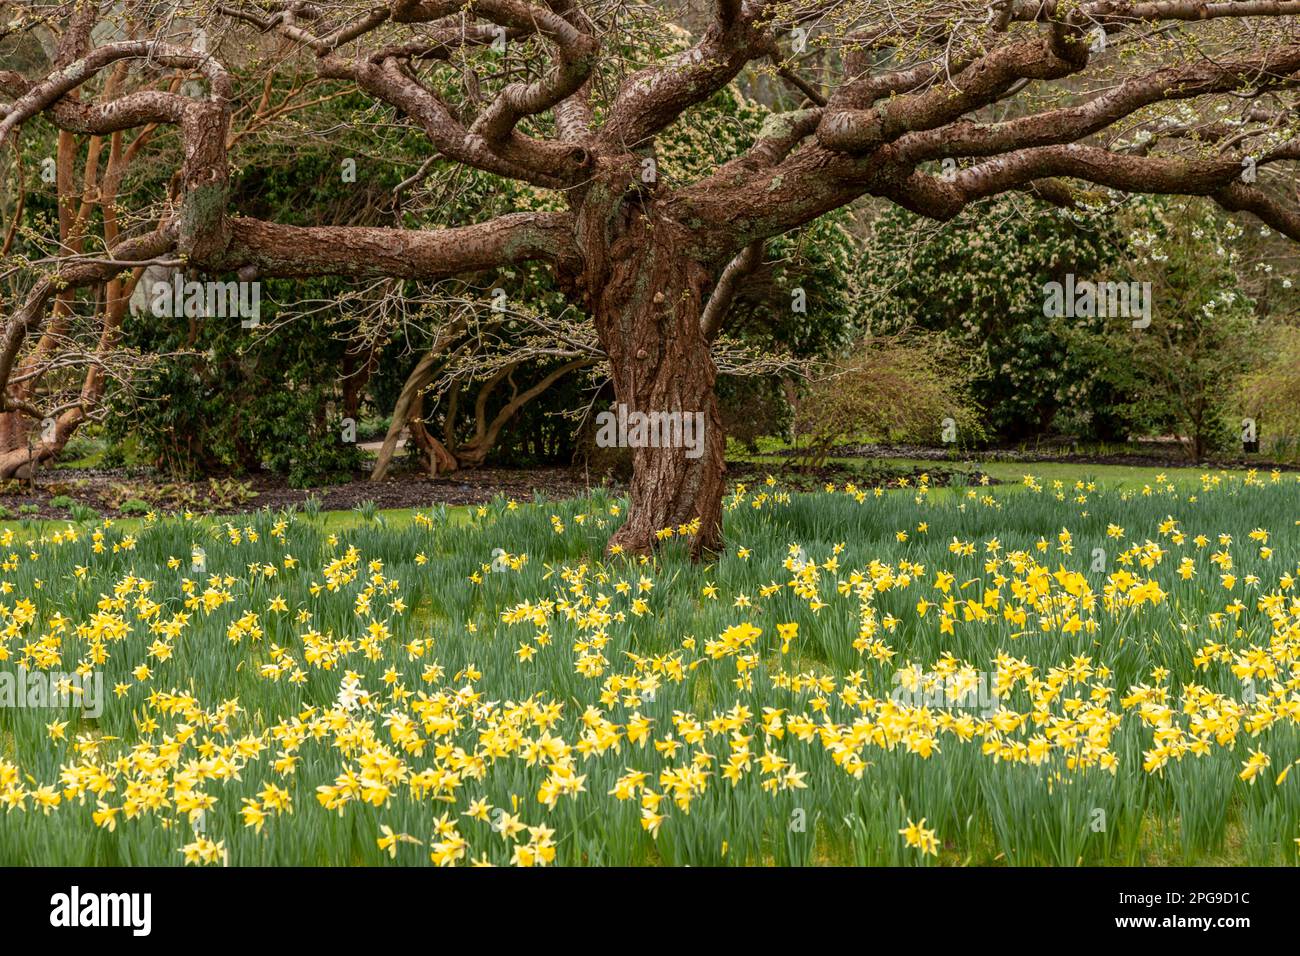 Daffodil flowers in spring with an ancient weathered tree Stock Photo